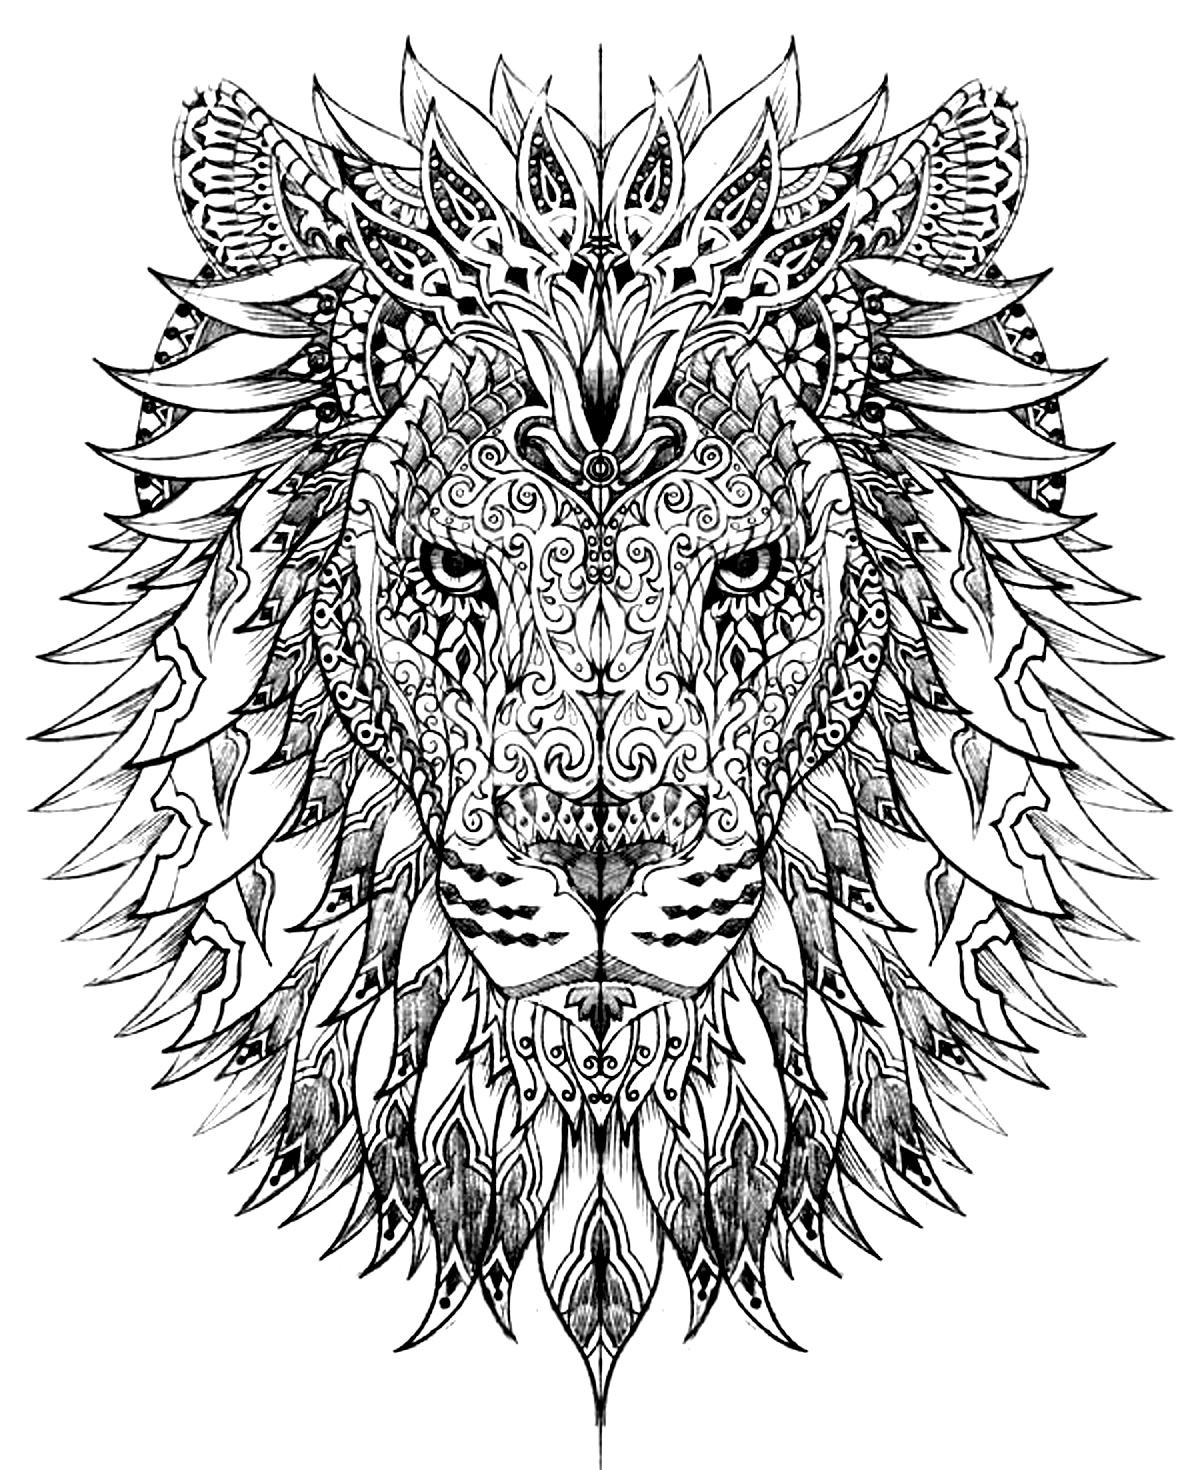 Coloring Pages For Adults Difficult
 Hard Coloring Pages for Adults Best Coloring Pages For Kids